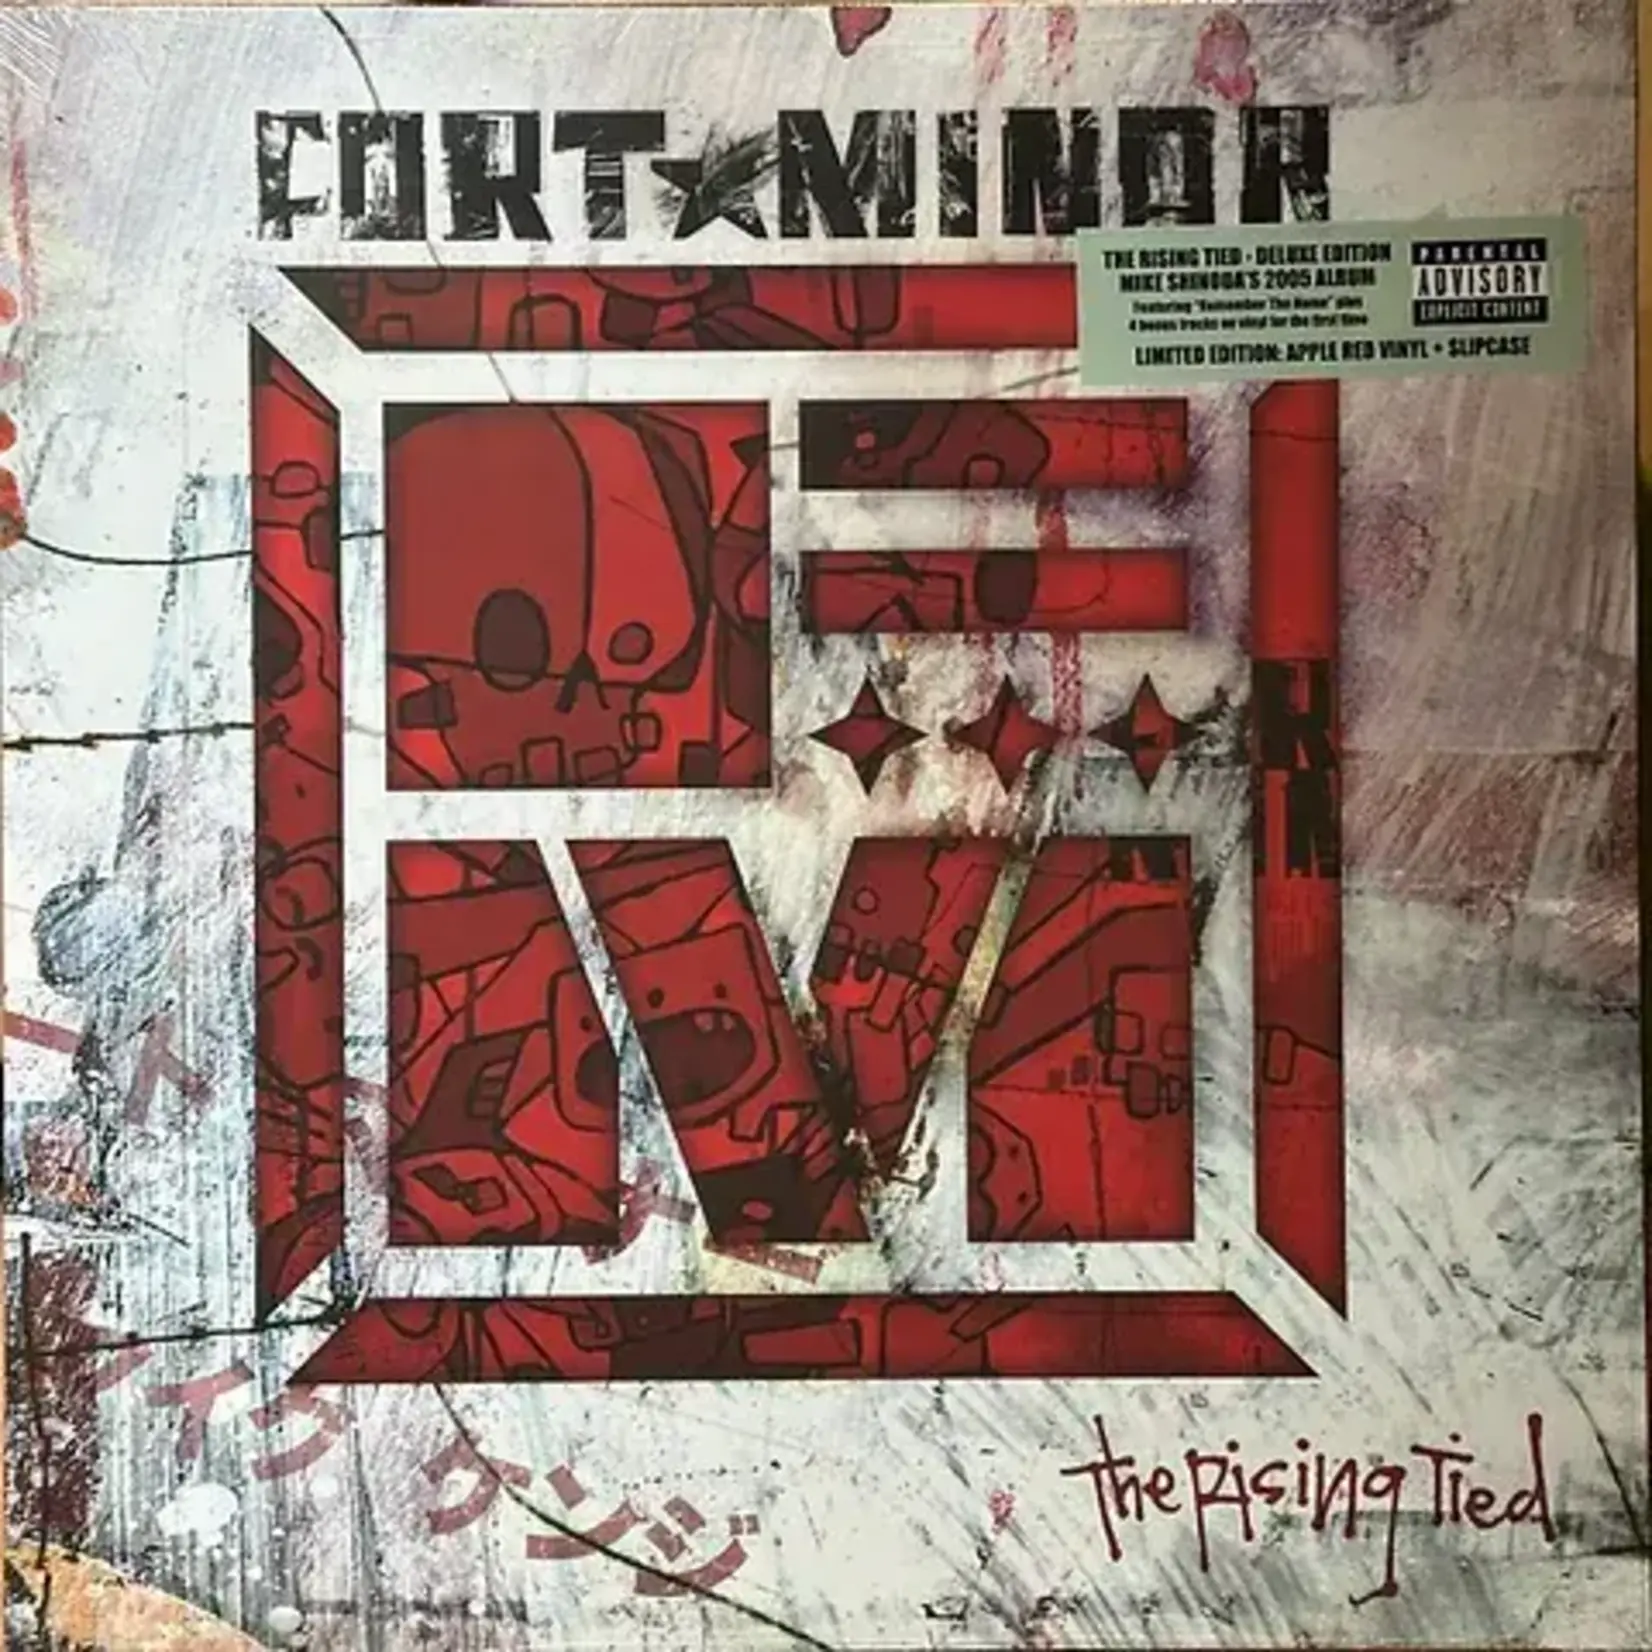 [New] Fort Minor (Linkin Park): The Rising Tied (2Lp, Deluxe Edition, red vinyl) [Warner]